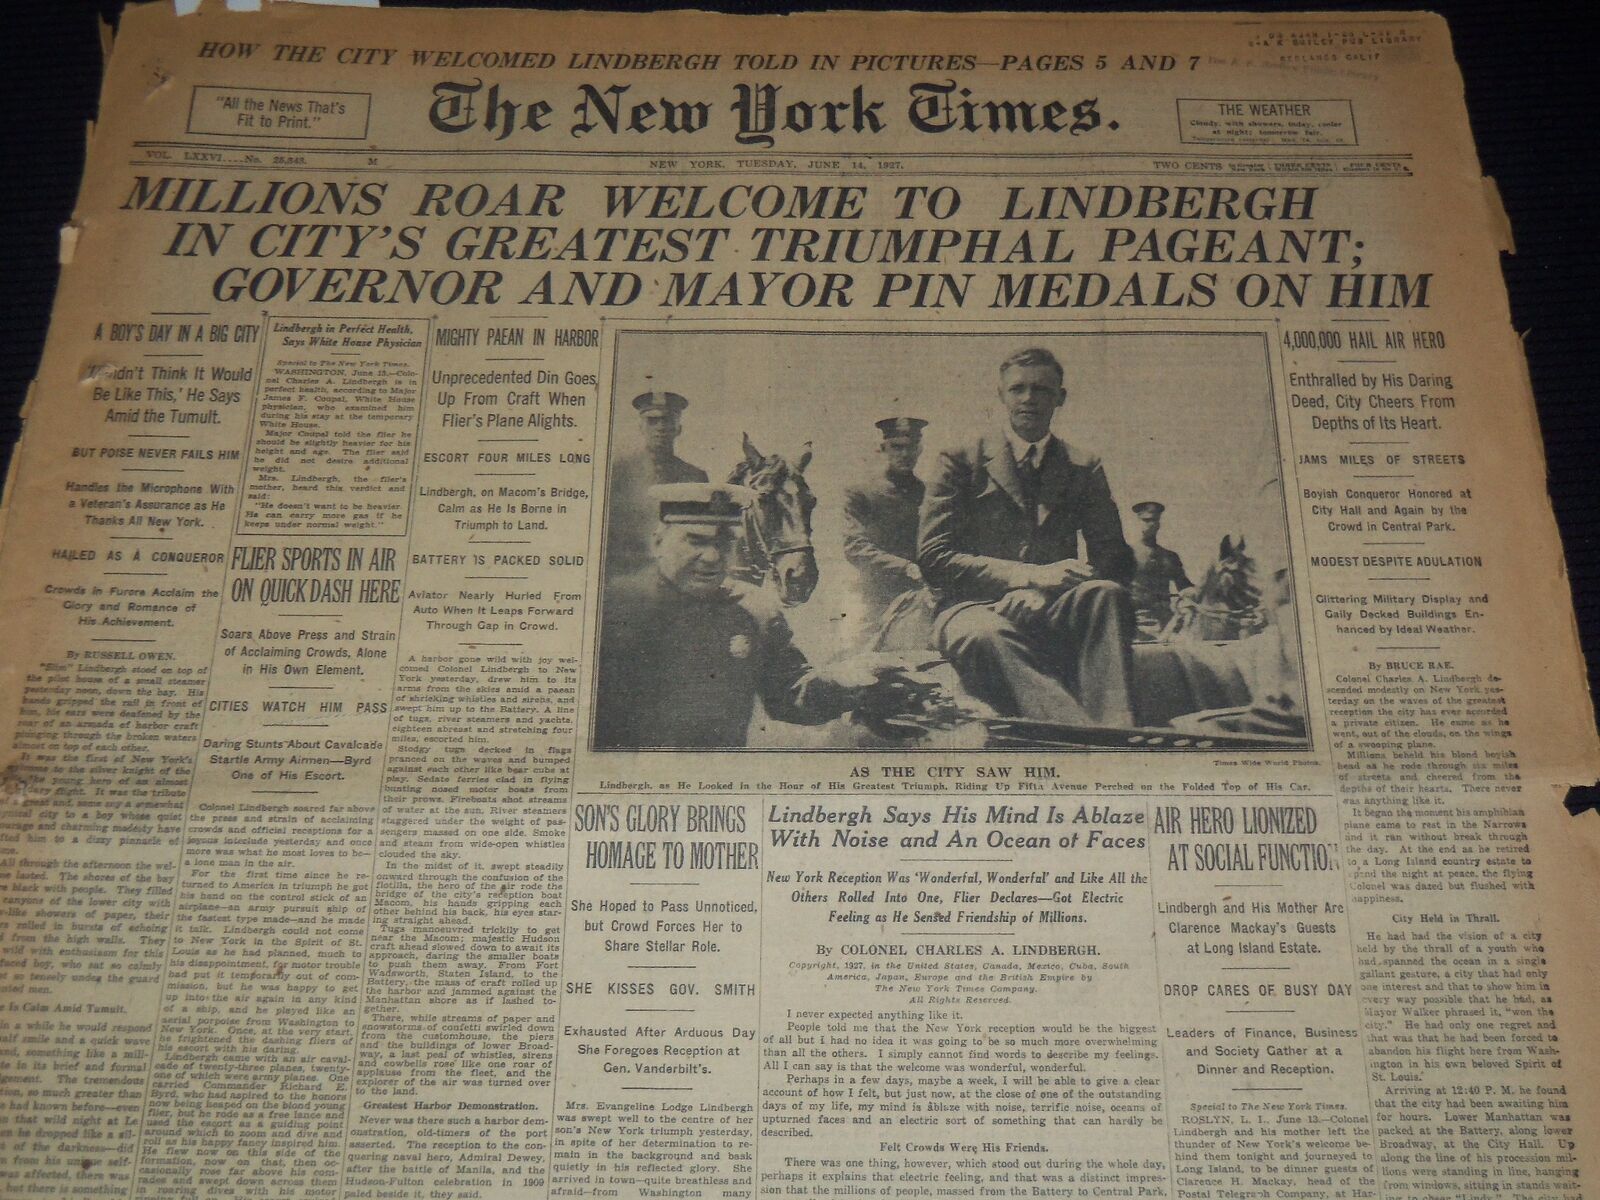 1927 JUNE 14 NEW YORK TIMES - MILLIONS ROAR WELCOME TO LINDBERGH - NT 9551